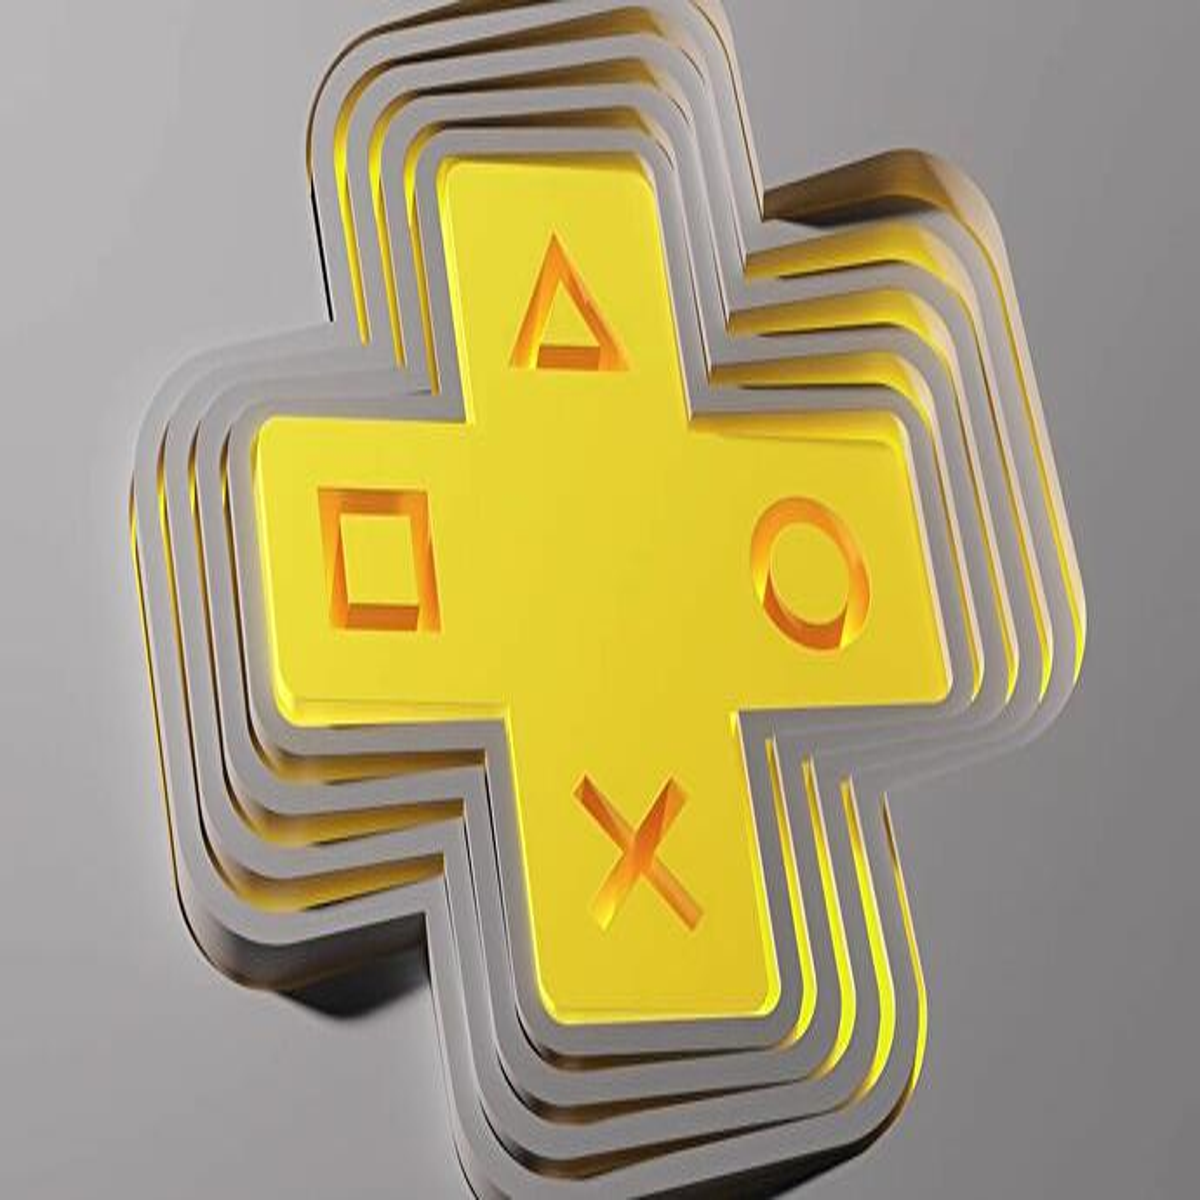 NEW PlayStation Plus Explained: Which is the Best Option? 